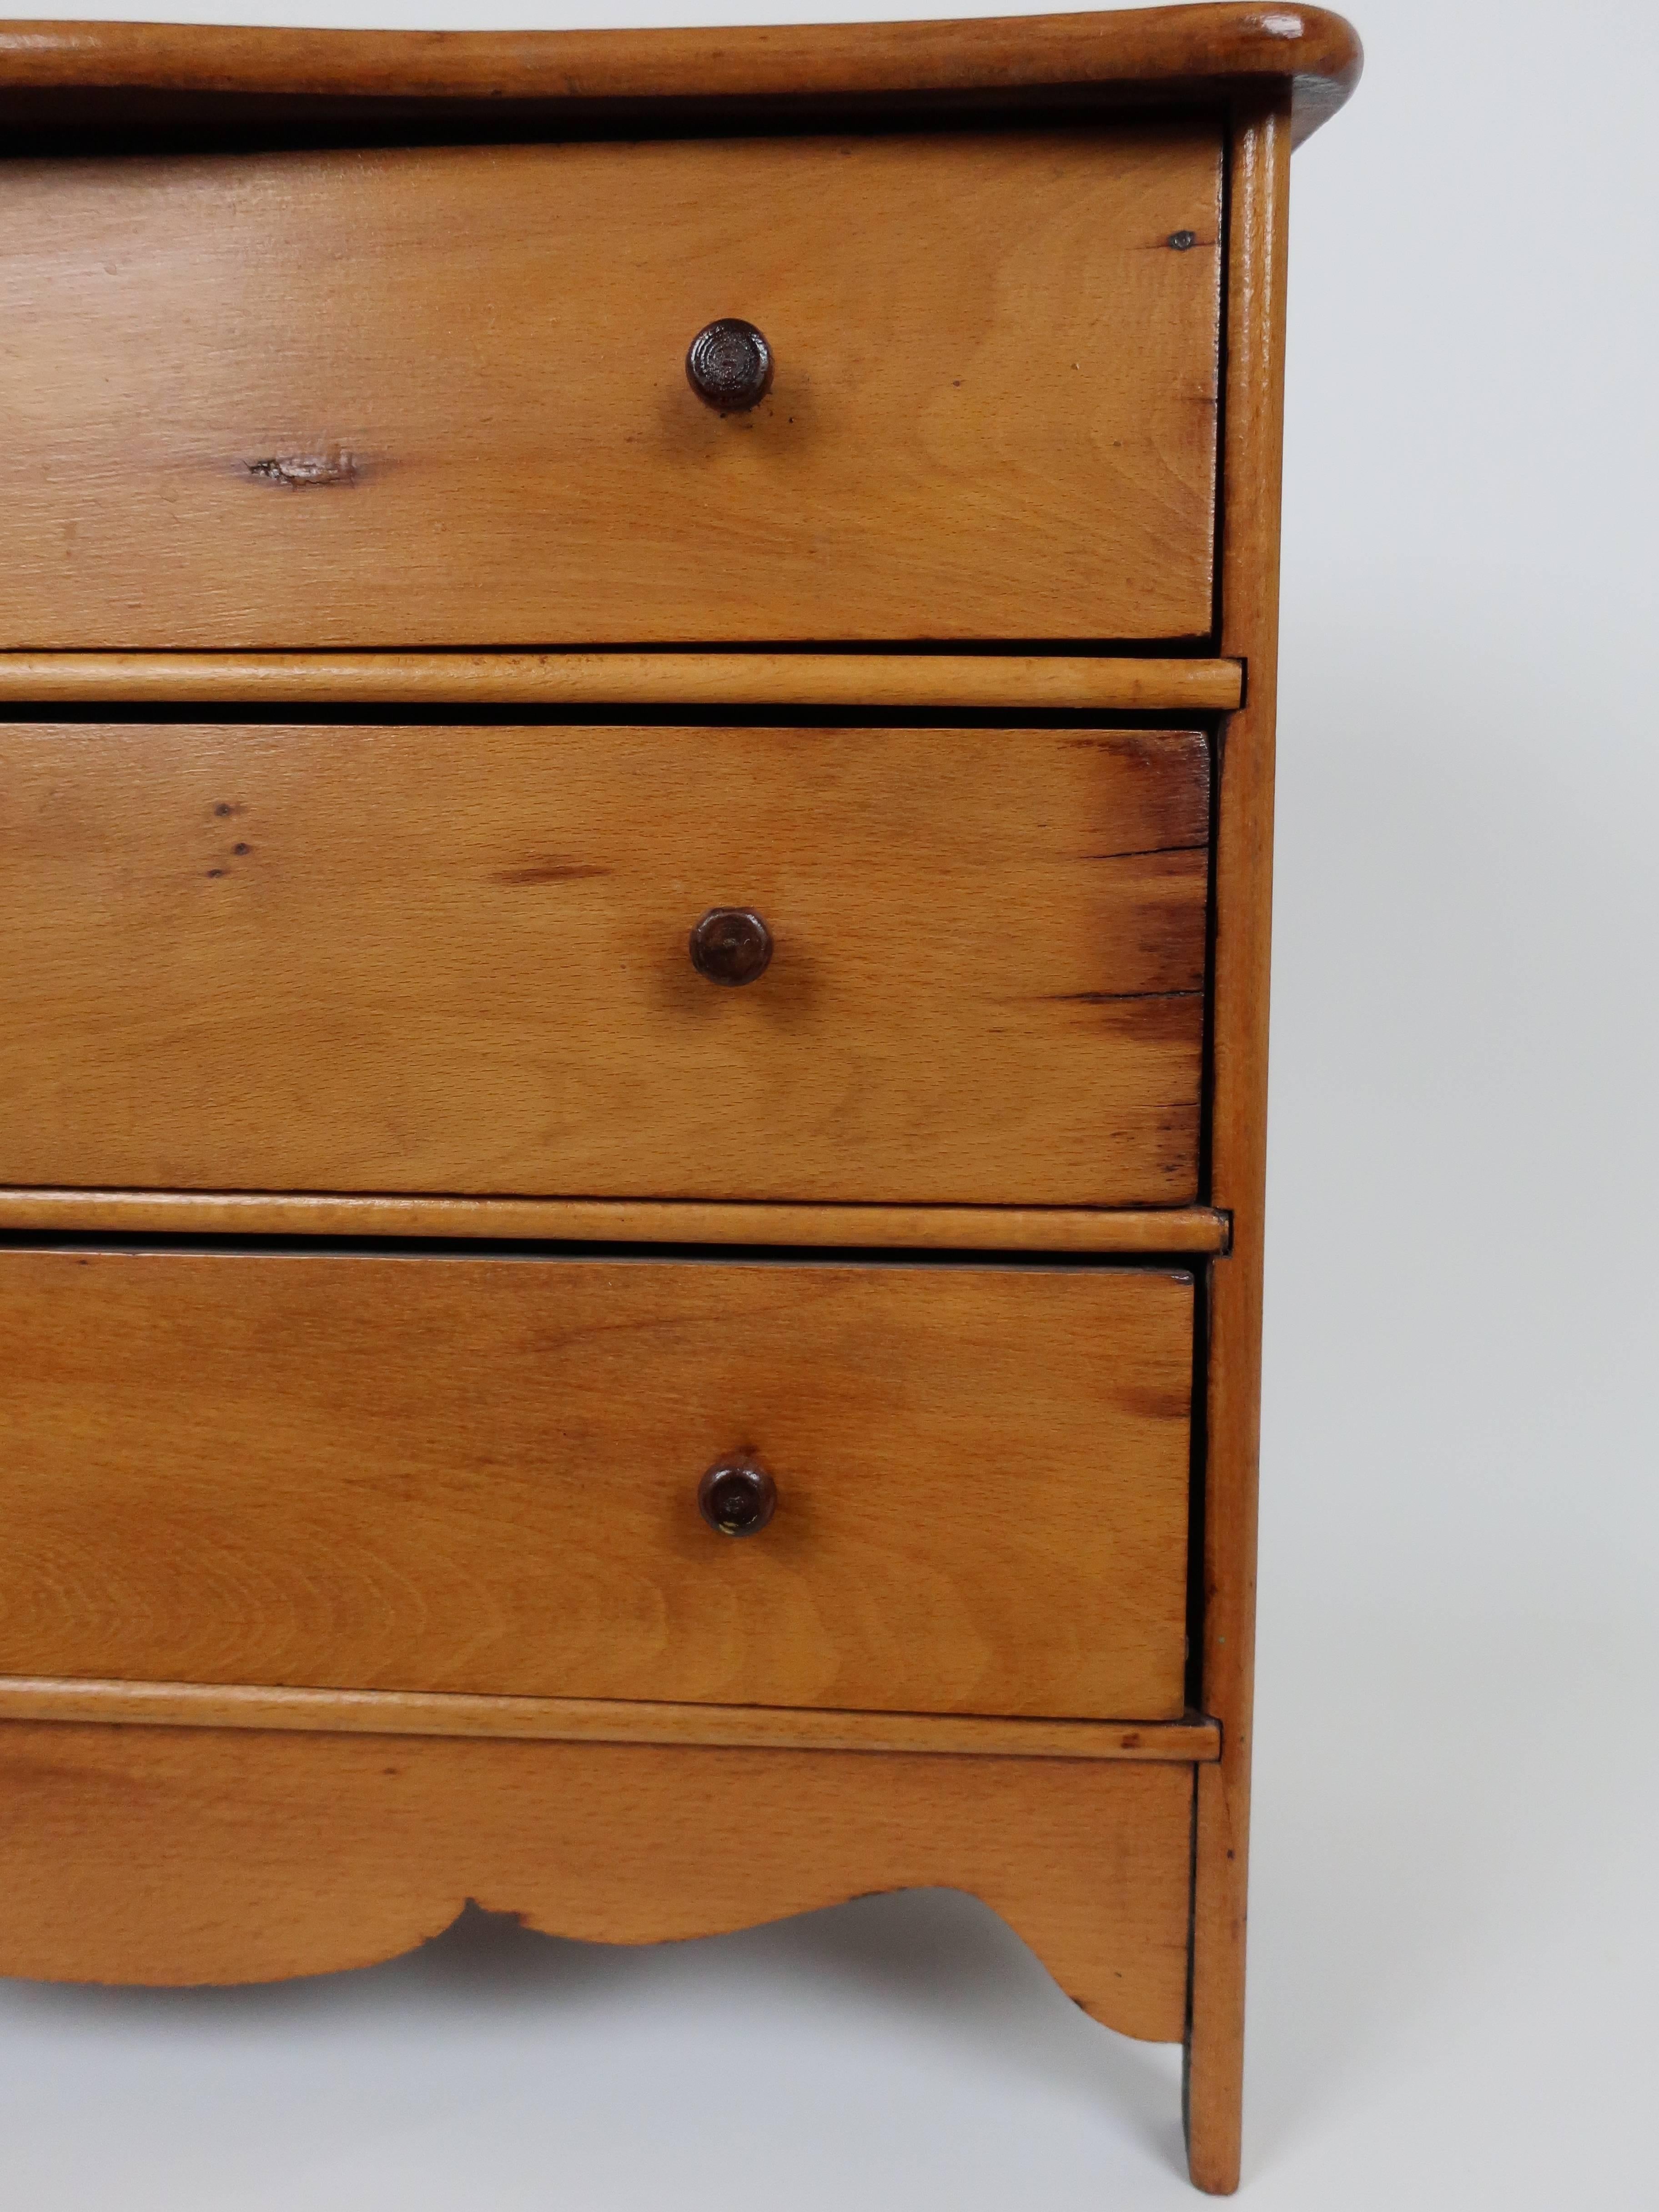 Hand-Crafted Early 19th Century American Miniature Pine Chest of Drawers